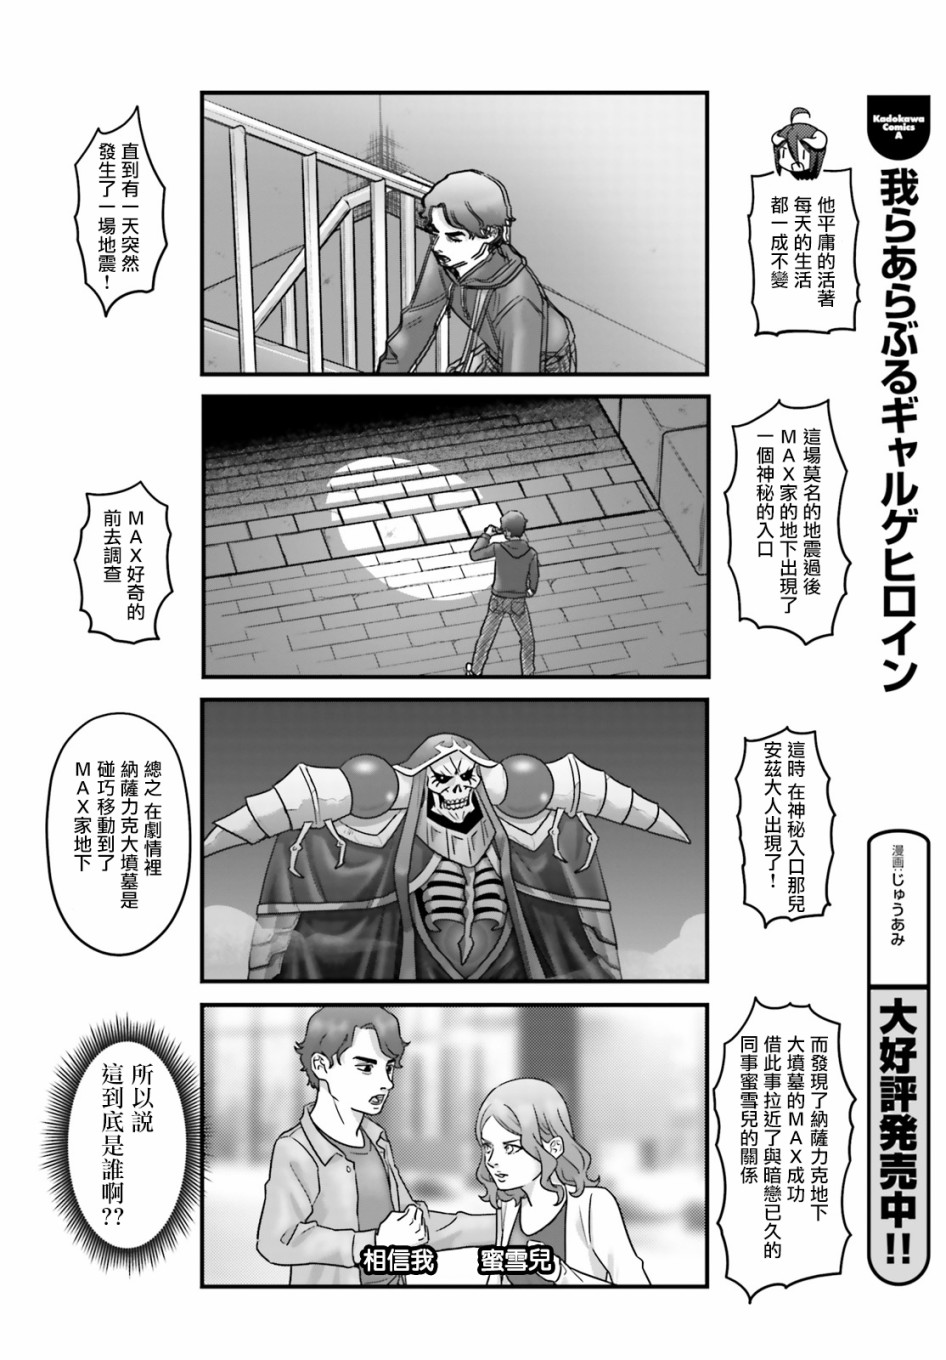 Overlord不死者之OH！ - 30話 - 1